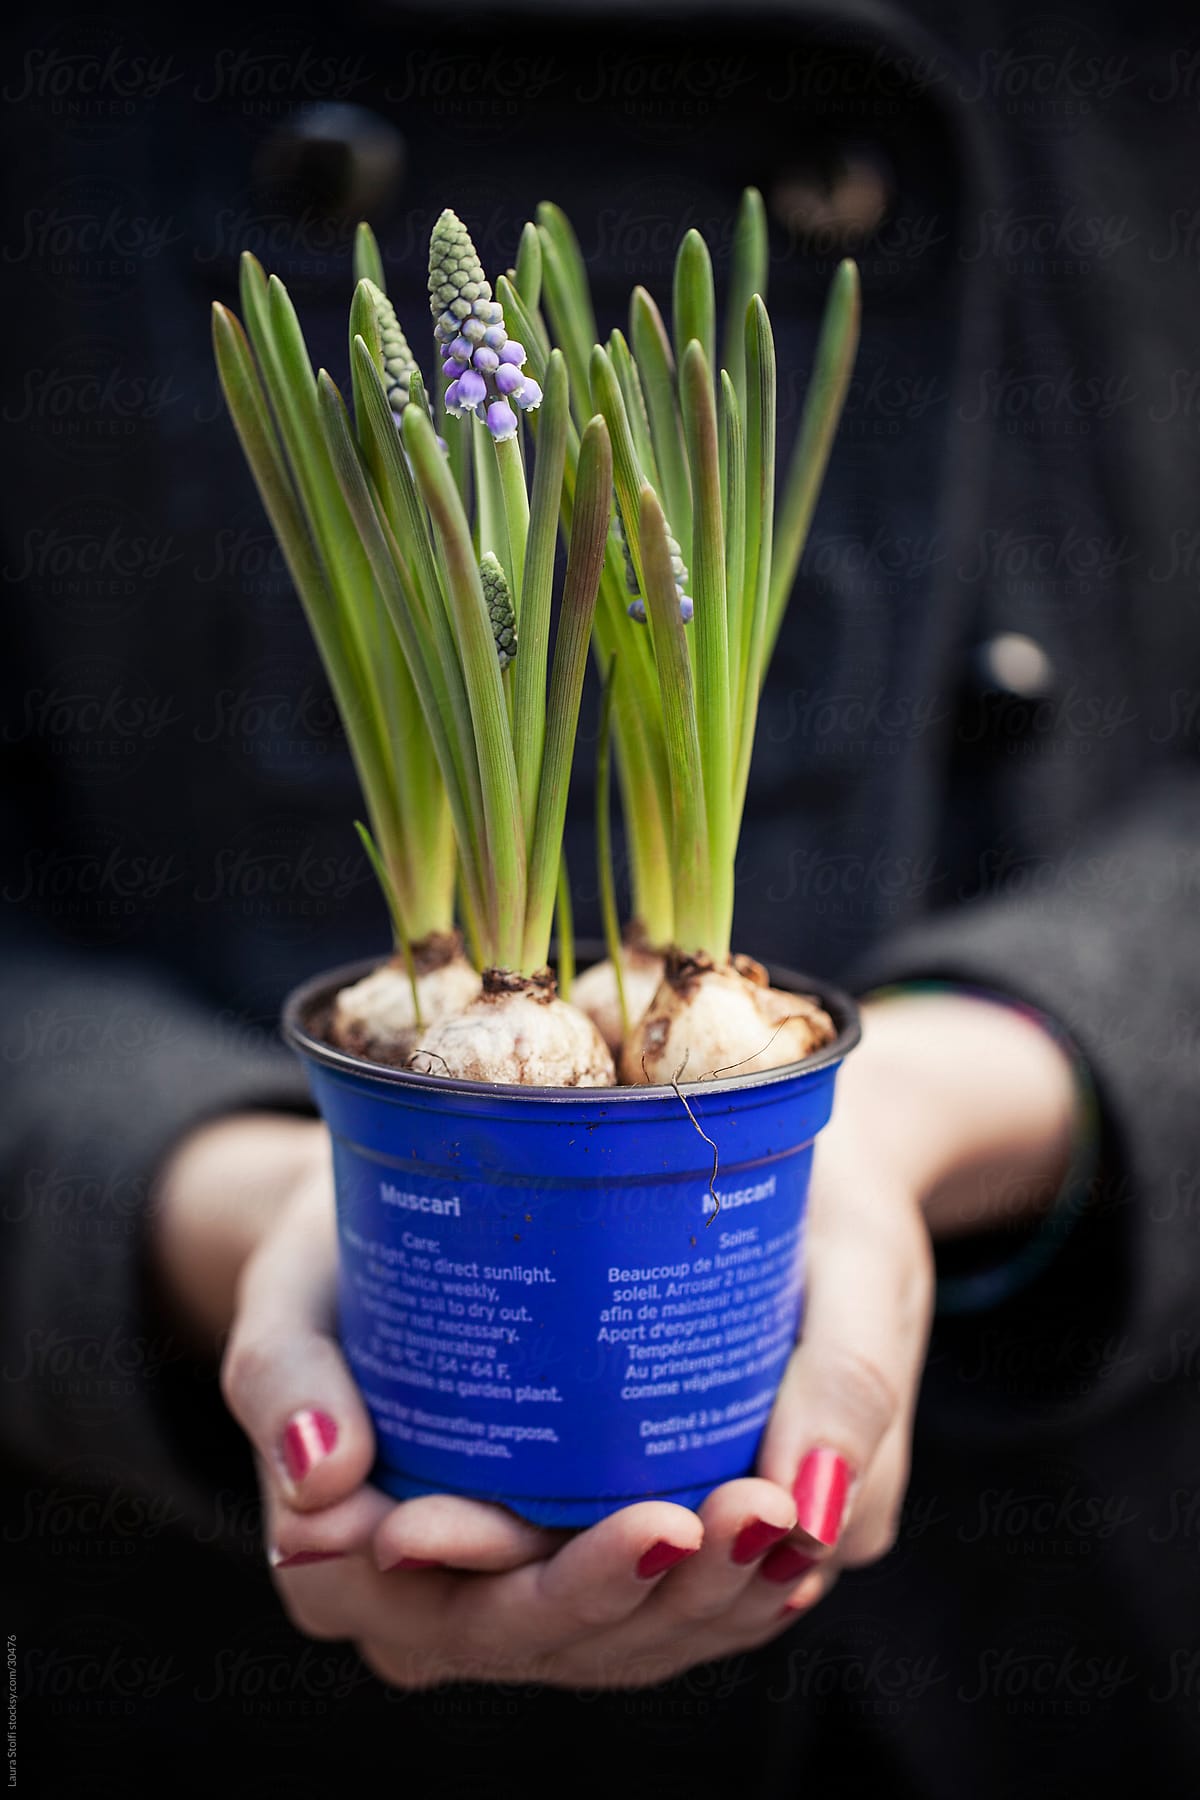 Woman with red polish on holding in her hands Muscari in pot